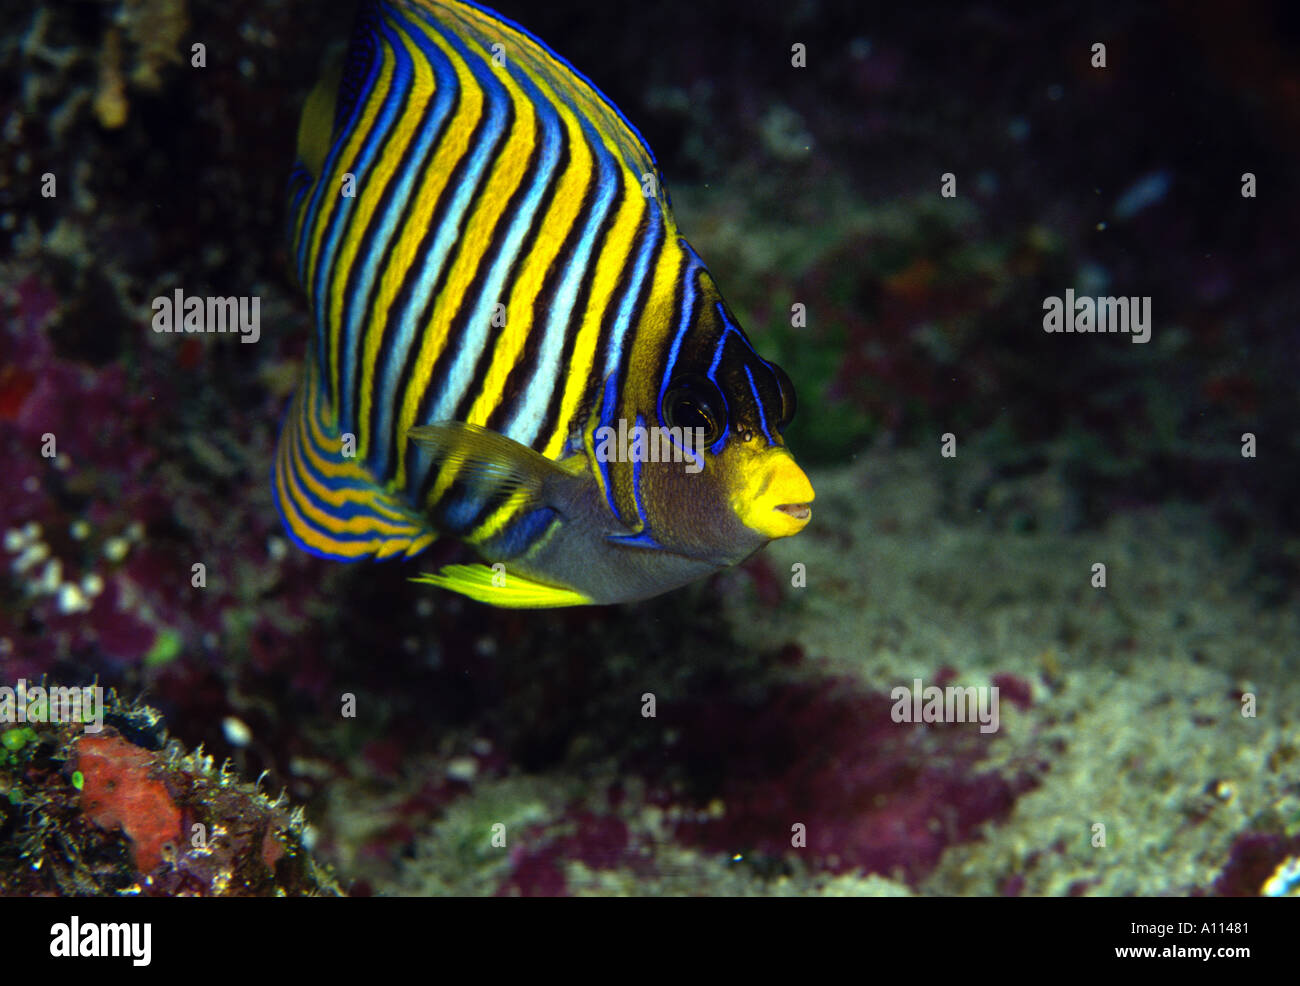 A JUVENILE REGAL ANGELFISH Pygoplites diacanthus LOOKS ABOUT FOR ITS NEXT MEAL OF SPONGES IN THE WATERS OF FIJI Stock Photo